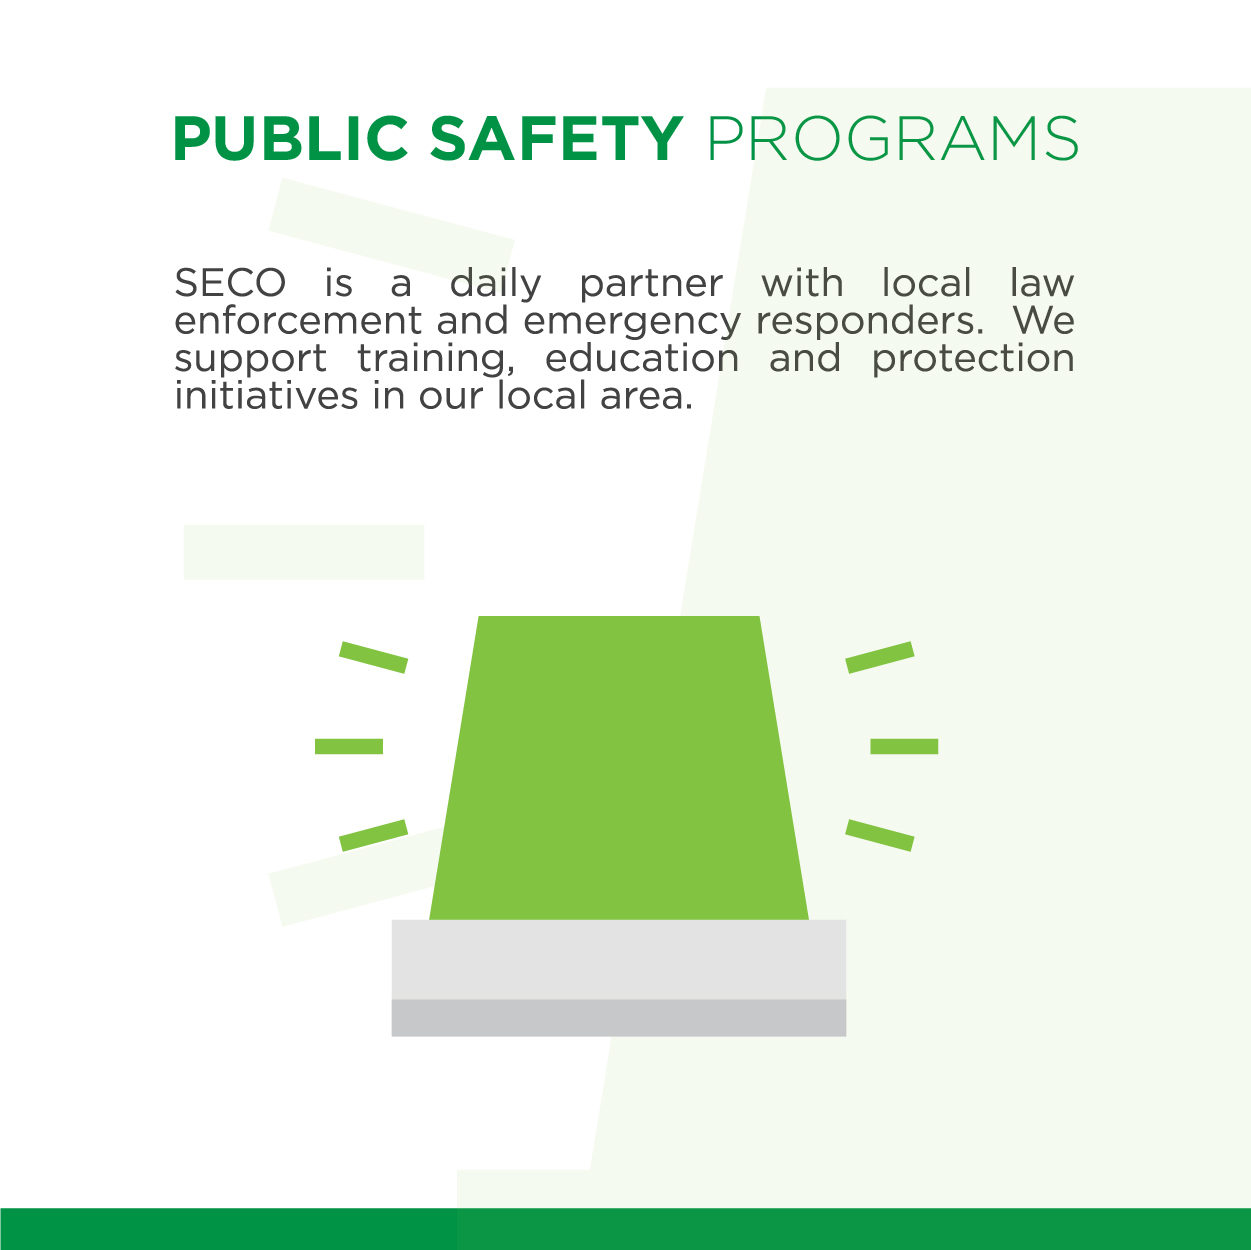 Public Safety Programs SECO is a daily partner with local law enforcement and emergency first responders. We support training, education and protection initiatives in our local area.